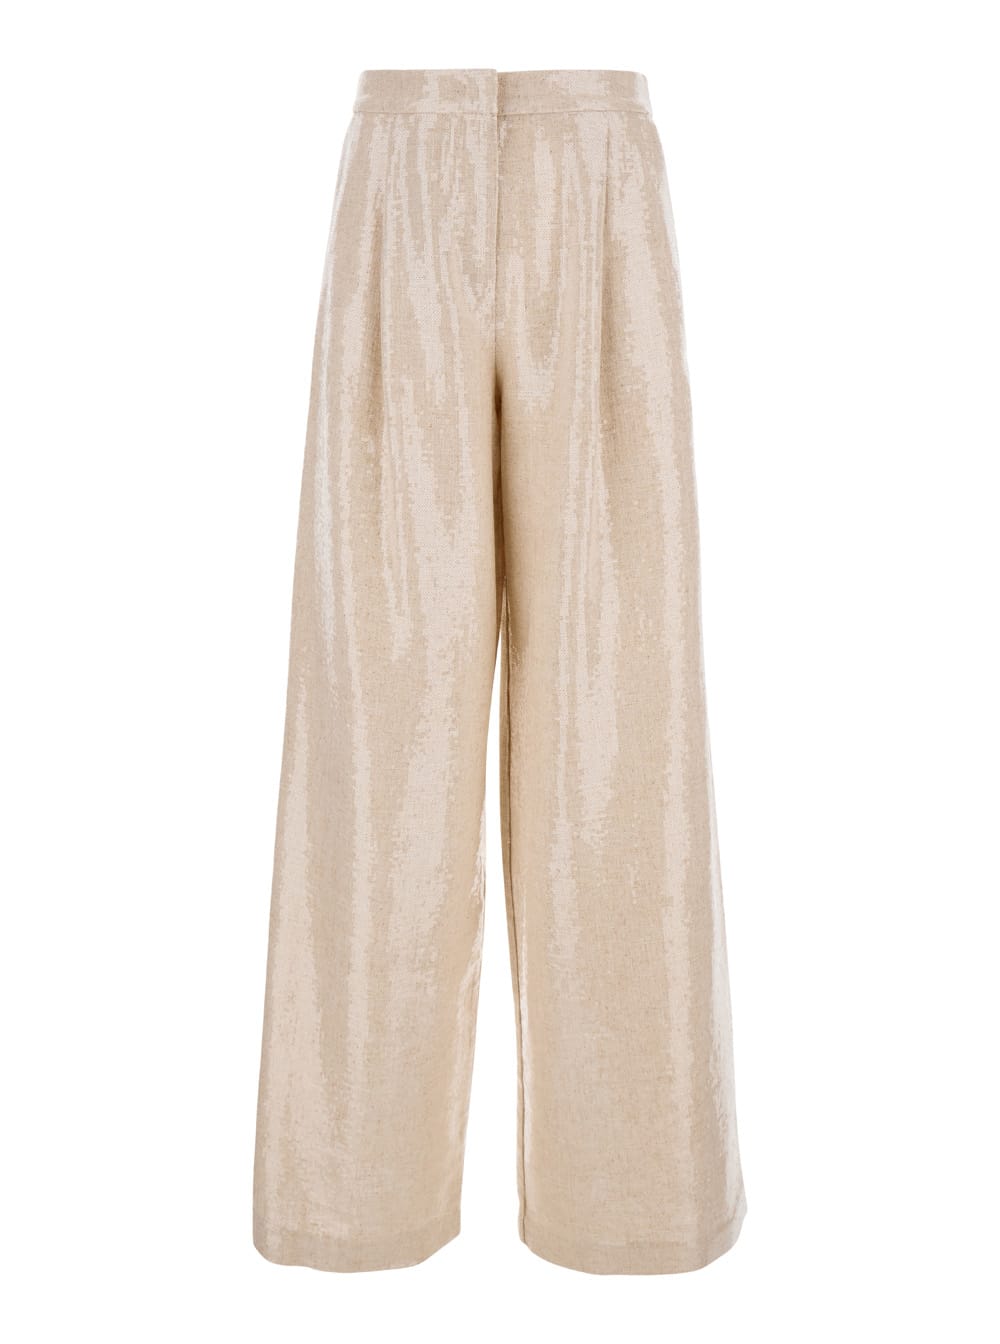 FEDERICA TOSI PAILLETTES PANTS